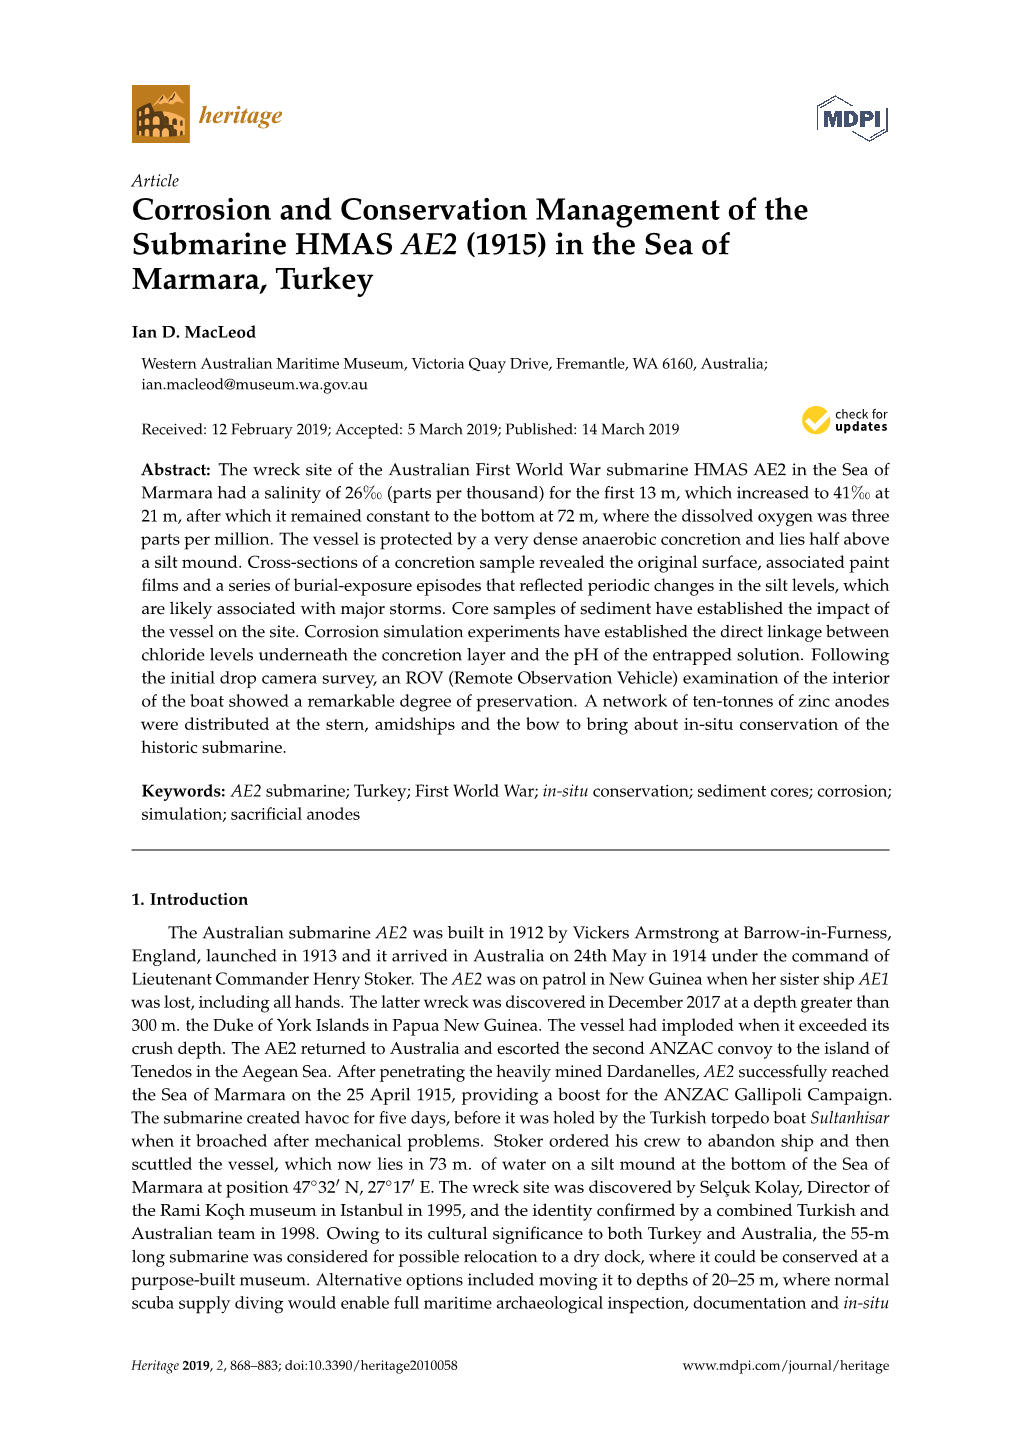 Corrosion and Conservation Management of the Submarine HMAS AE2 (1915) in the Sea of Marmara, Turkey